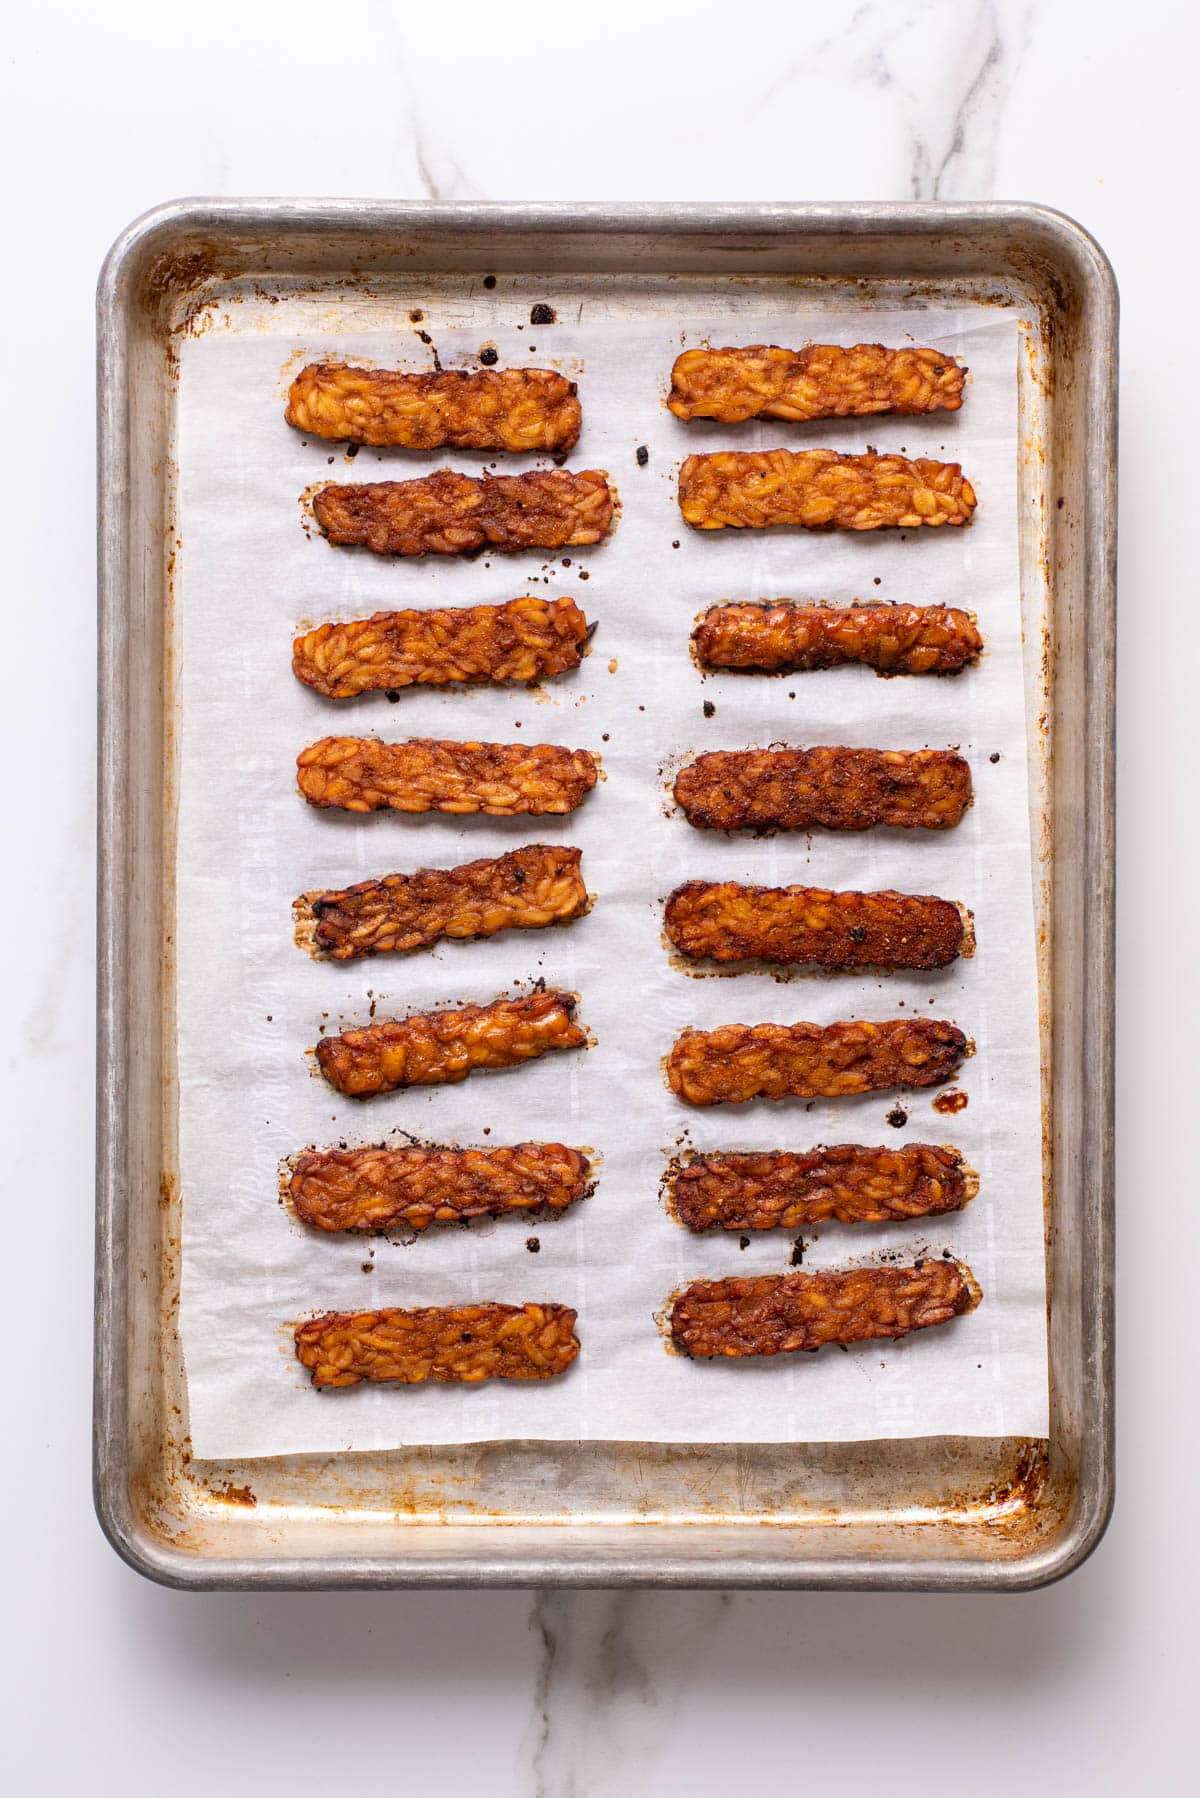 Baked tempeh strips on a baking sheet.